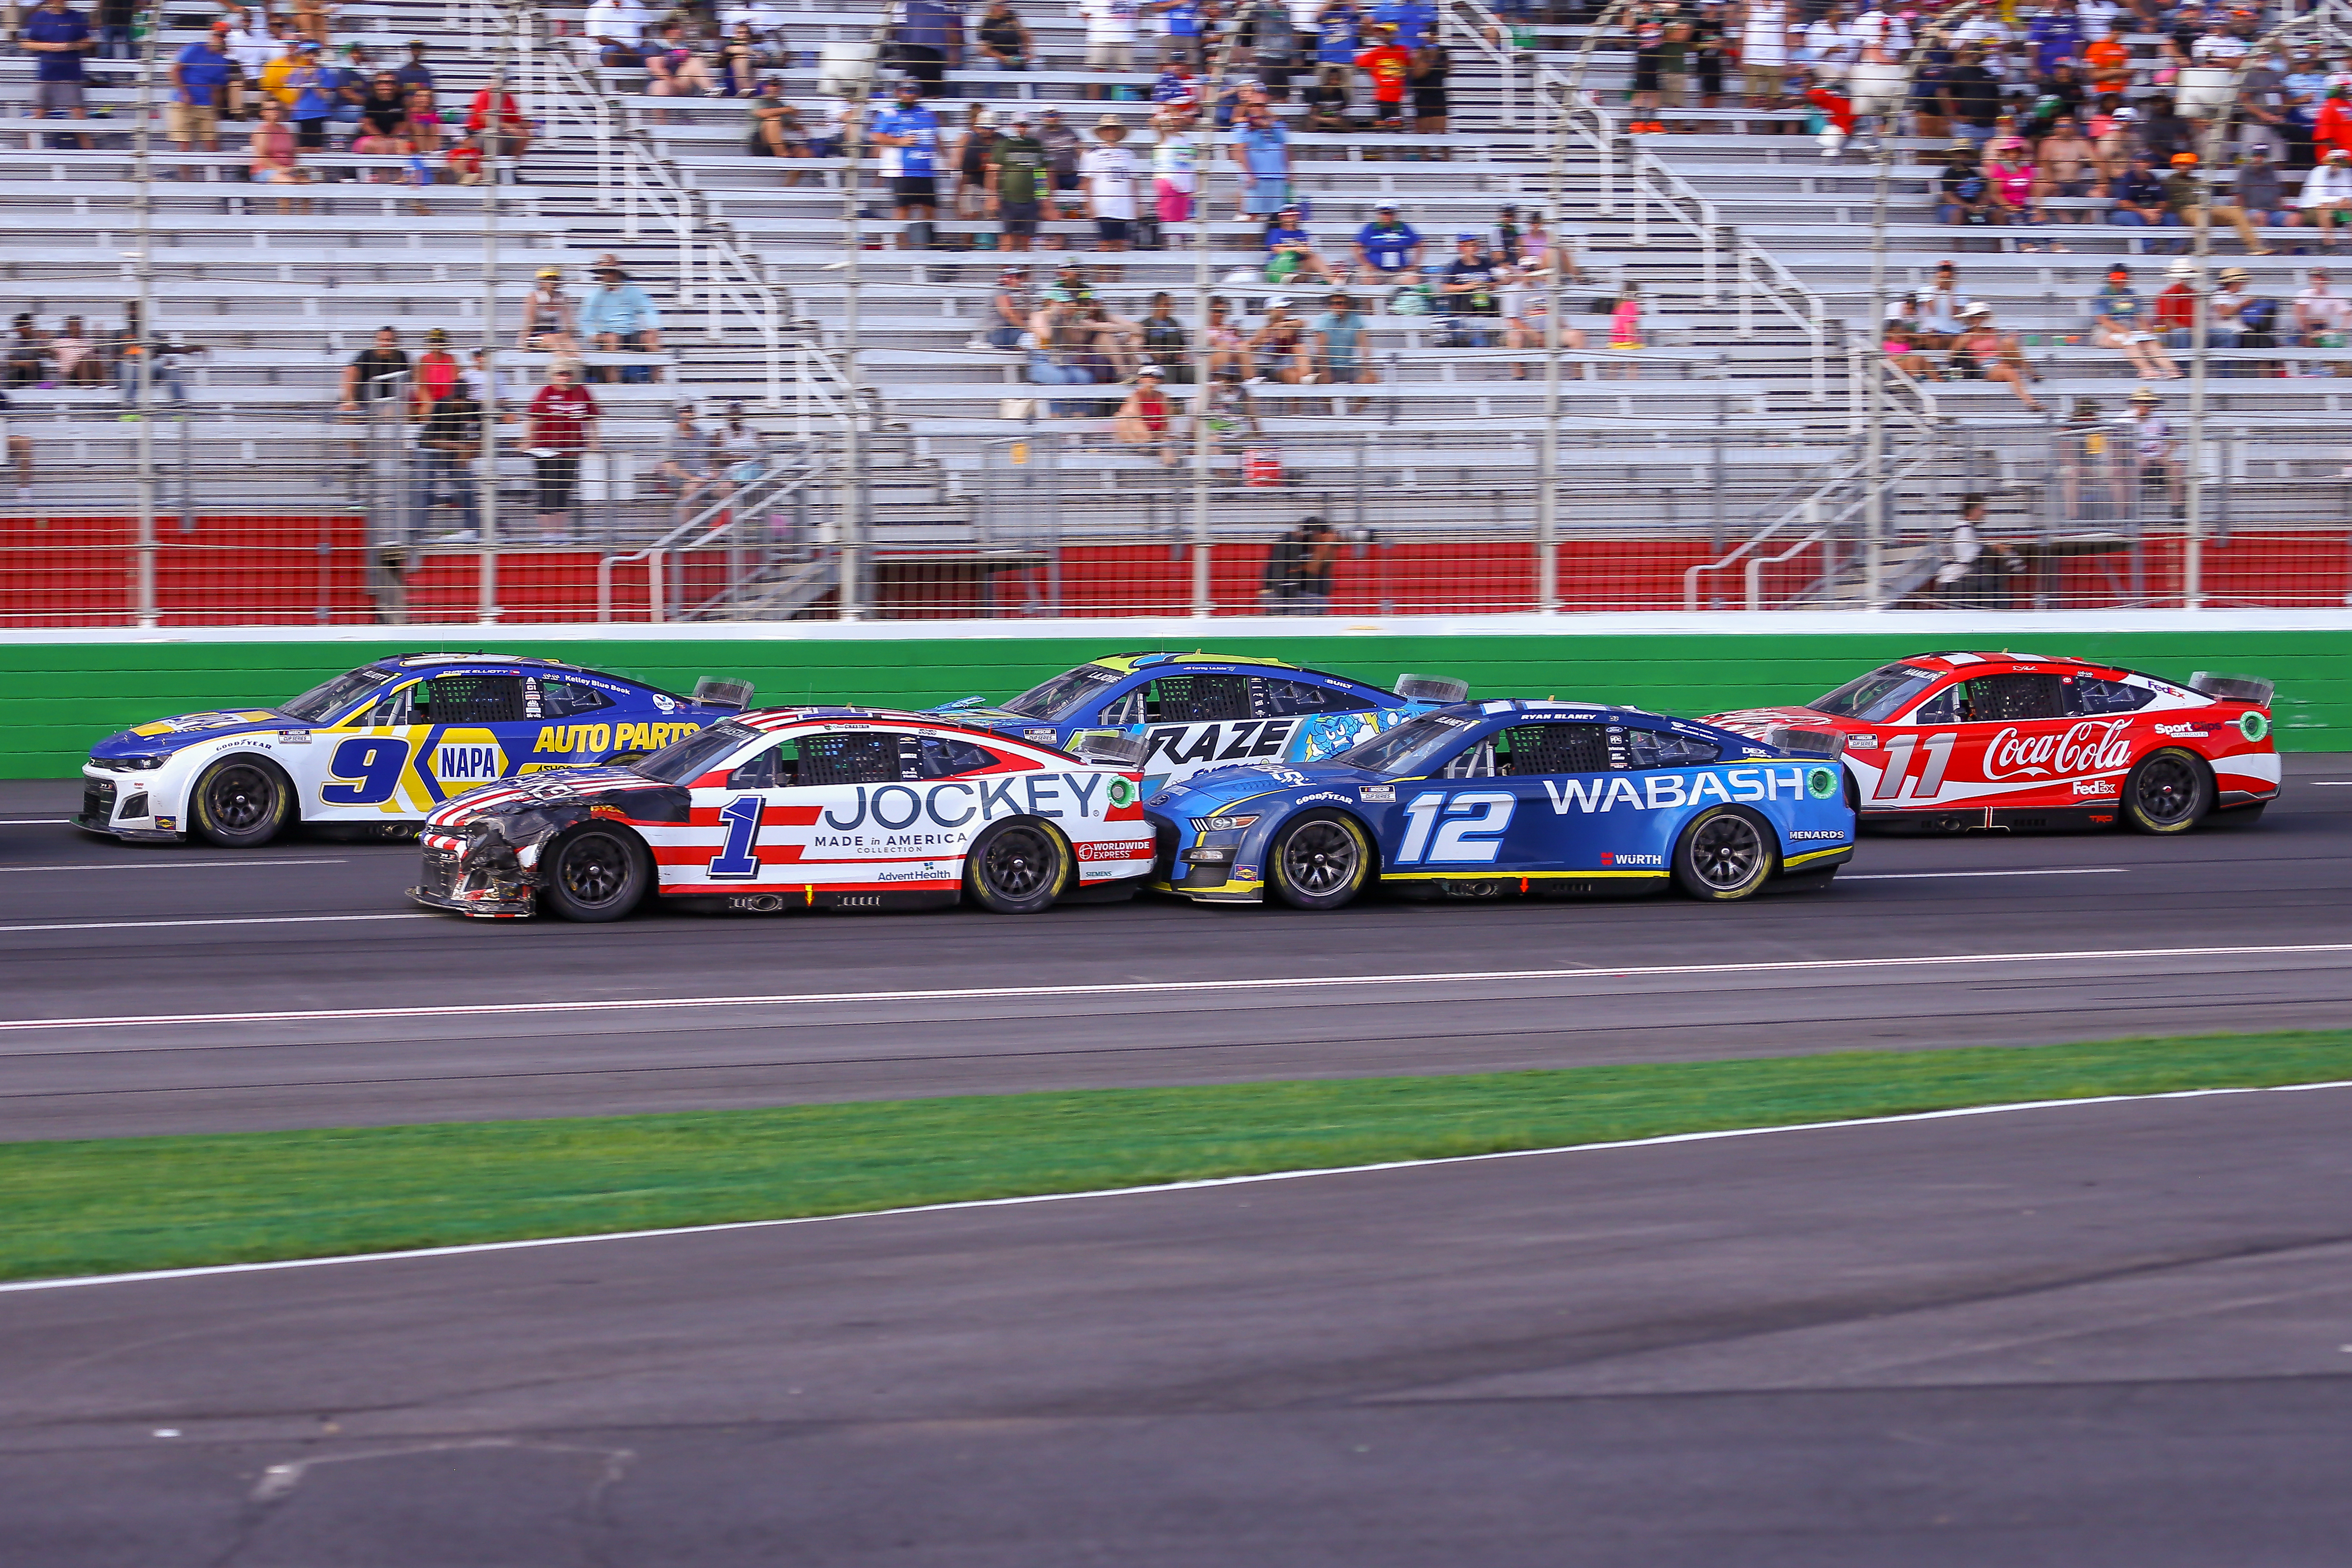 NASCAR Cup Series driver Chase Elliott (9), NASCAR Cup Series driver Ross Chastain (1), NASCAR Cup Series driver Ryan Blaney (12), NASCAR Cup Series driver Corey LaJoie (7), and NASCAR Cup Series driver Denny Hamlin (11) race in close quarters during the Quaker State 400 Presented by Walmart on July 10, 2022 at Atlanta Motor Speedway in Atlanta, GA.